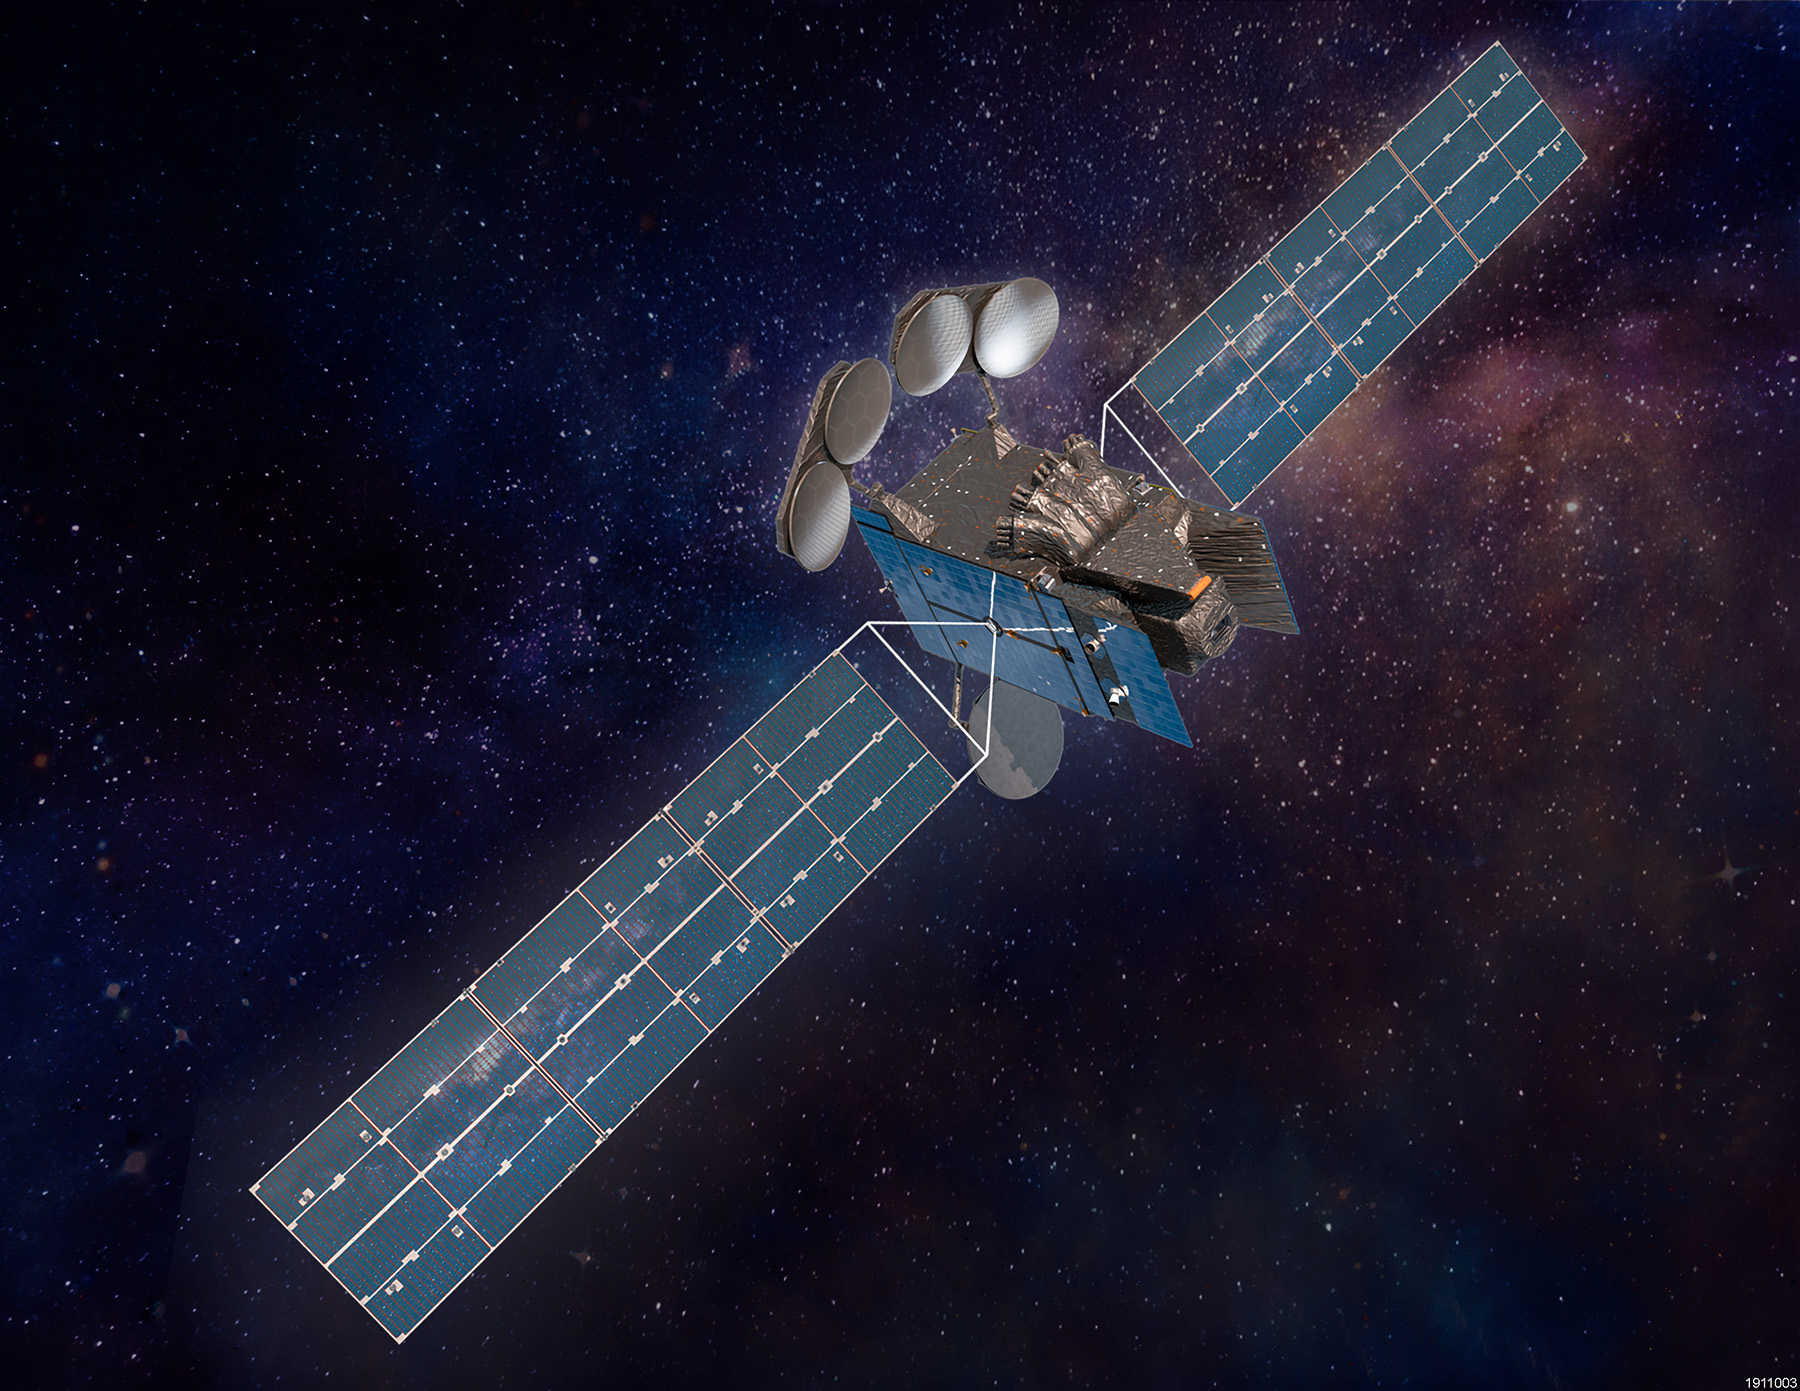 TEMPO will launch into geostationary orbit 22,236 miles above Earth's equator in 2022 as a payload on Intelsat 40e.